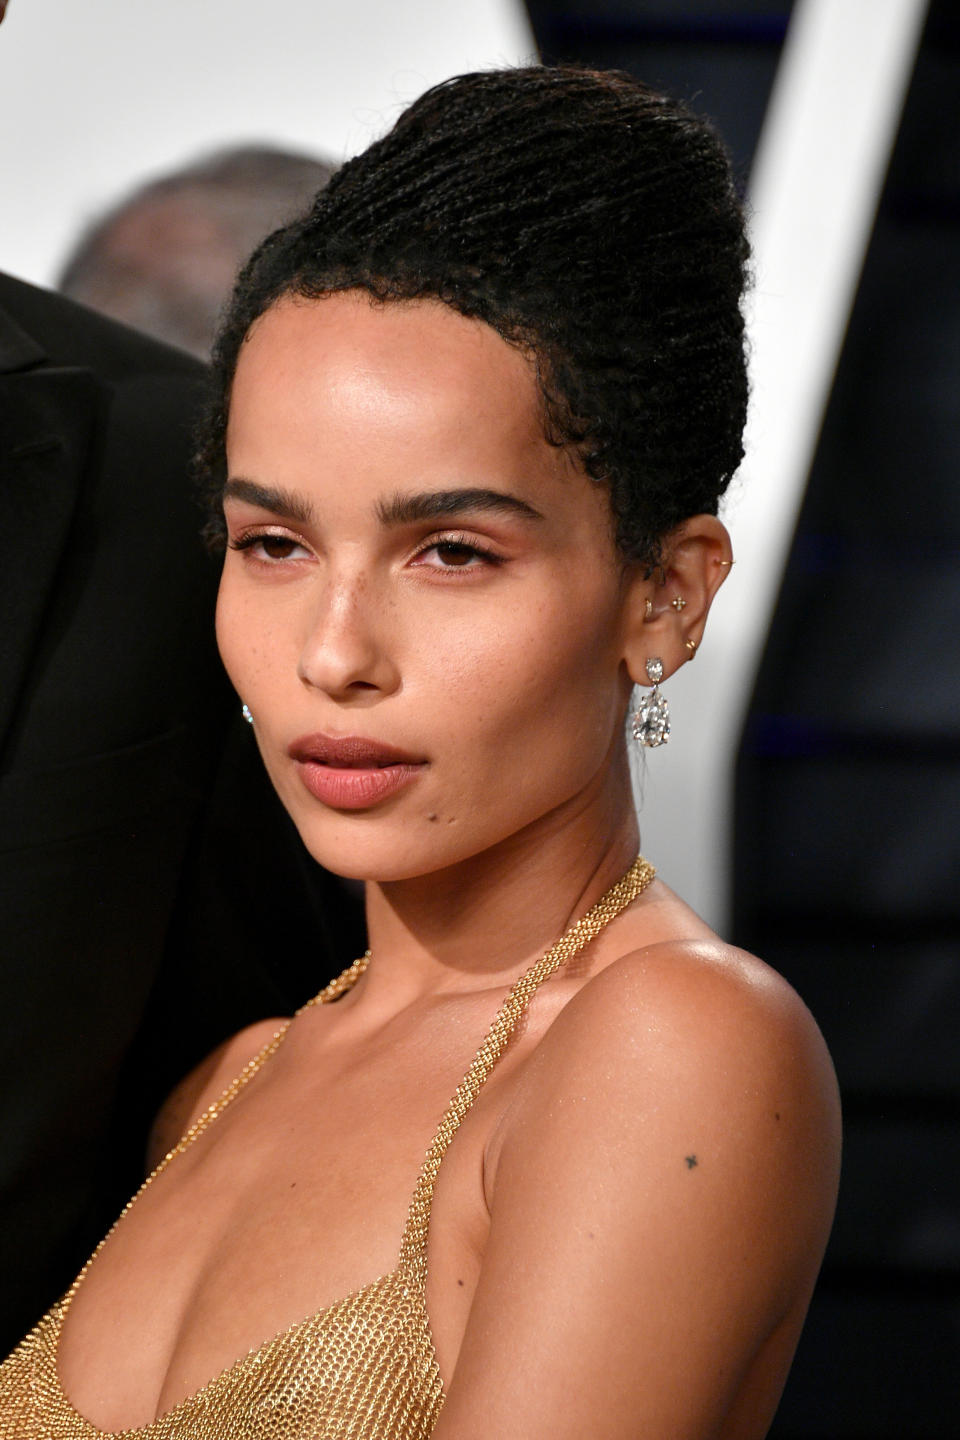 Zo&euml; Kravitz at the Vanity Fair Oscar Party in Los Angeles on Feb. 24. Makeup by <a href="https://www.instagram.com/p/BuS_uUdFUg2/" target="_blank" rel="noopener noreferrer">Nina Park</a> using YSL products, hair by <a href="https://www.instagram.com/p/BuTGC0OhSjg/" target="_blank" rel="noopener noreferrer">Nikki Nelms</a>.